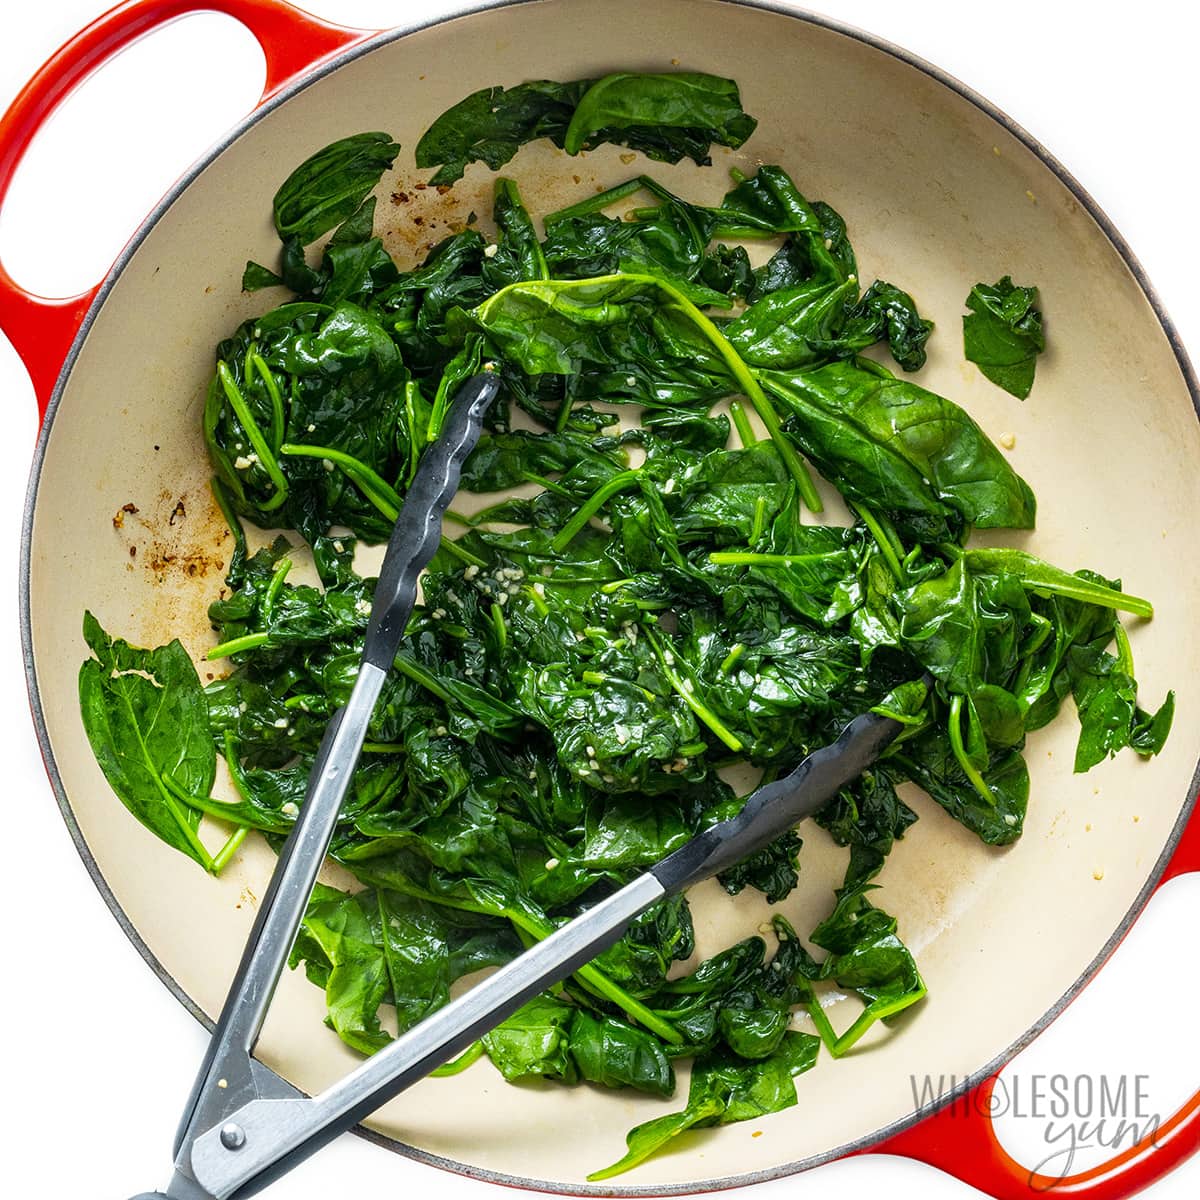 Spinach wilted in skillet.